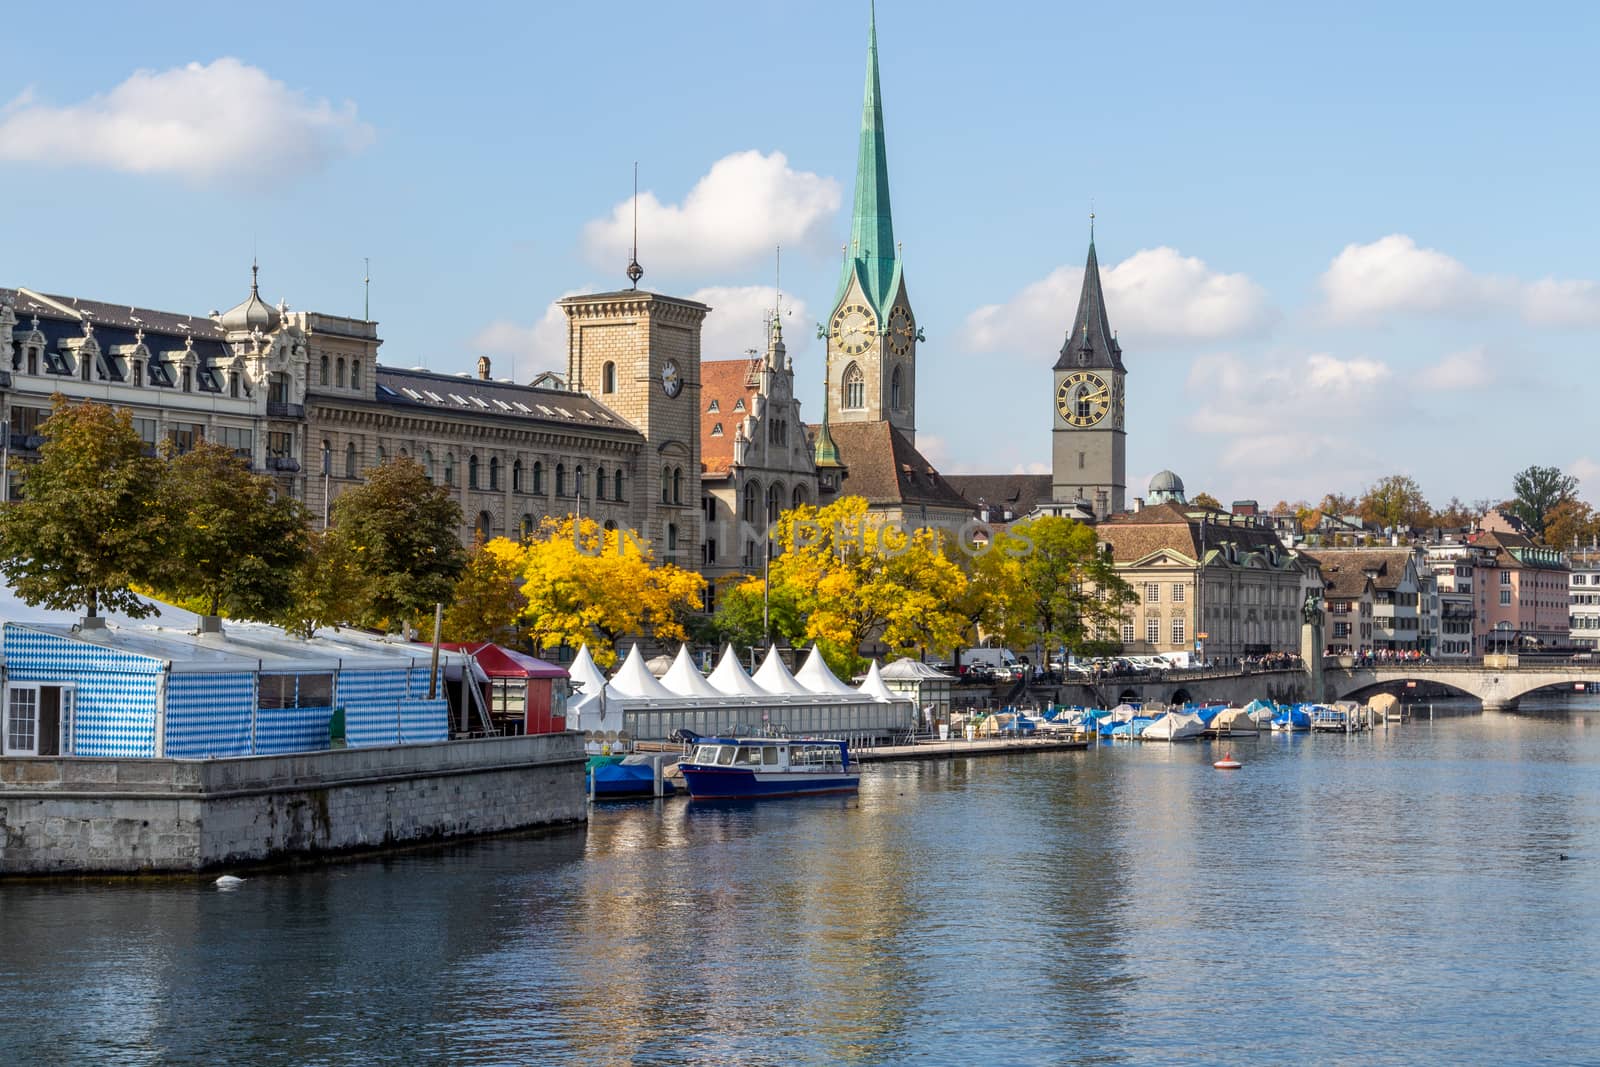 view at the waterfront of Limmat river in Zurich, Switzerland with ships, churchs and other buildings